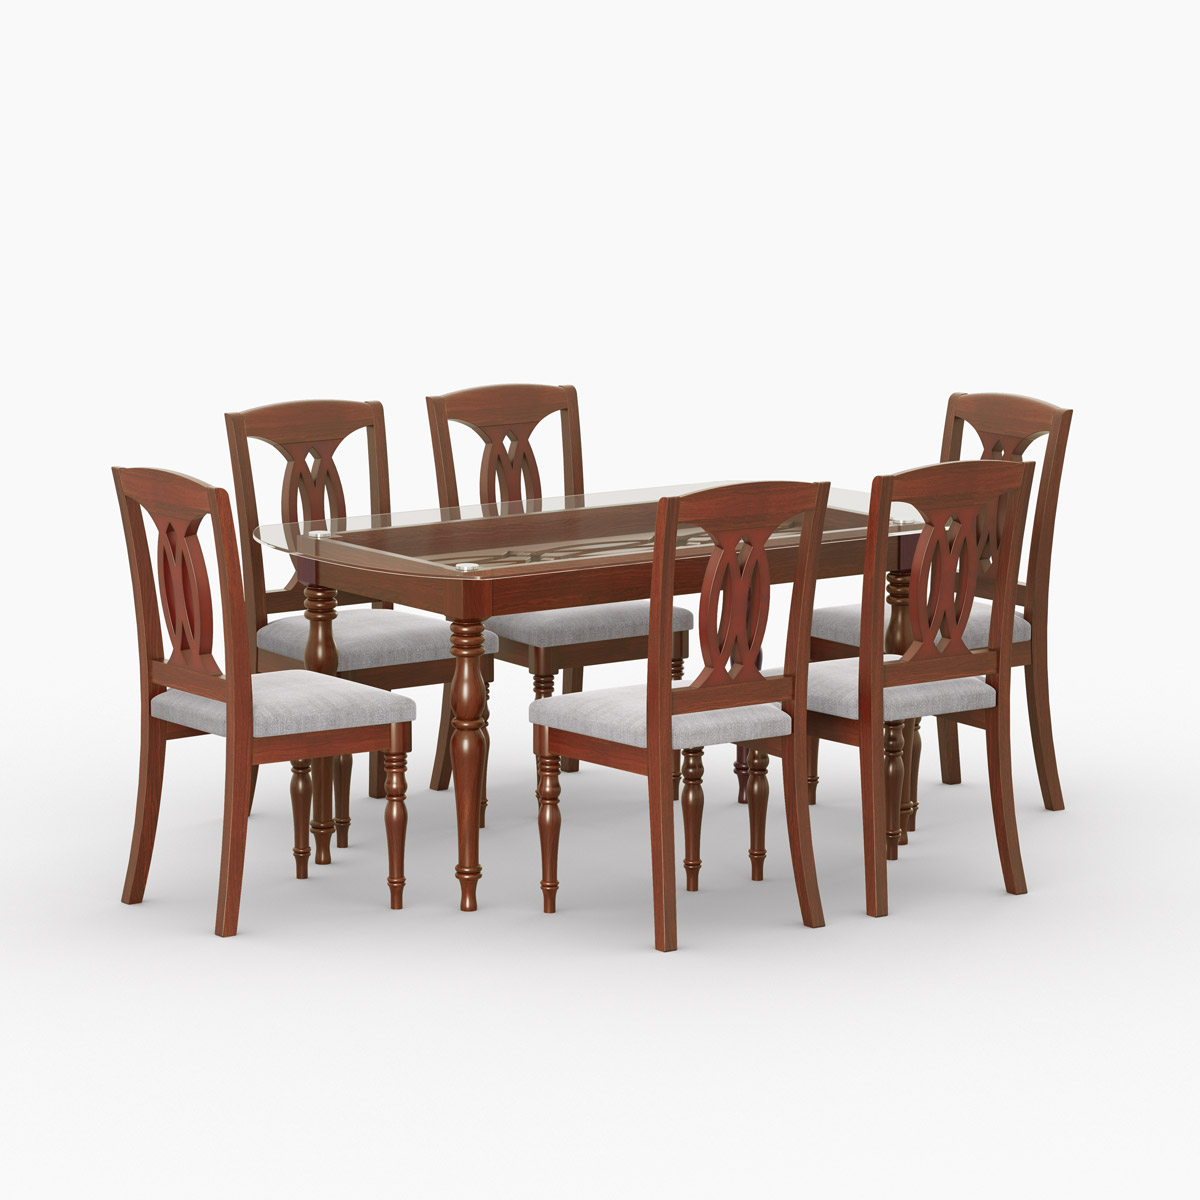 Nora - Dining table TDH-339-3-1-20